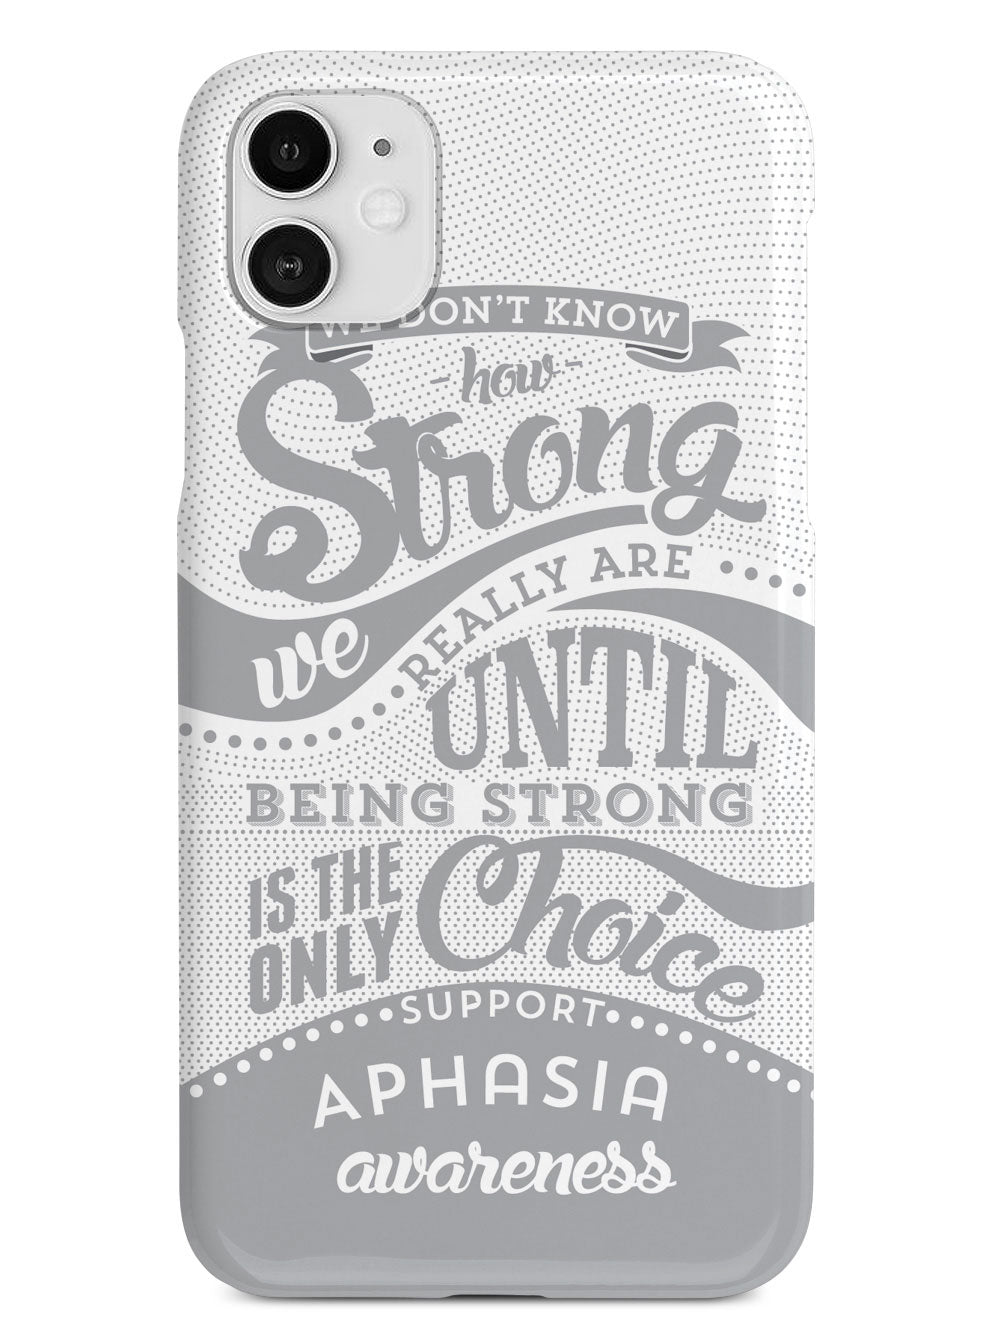 Aphasia Awareness - How Strong Case